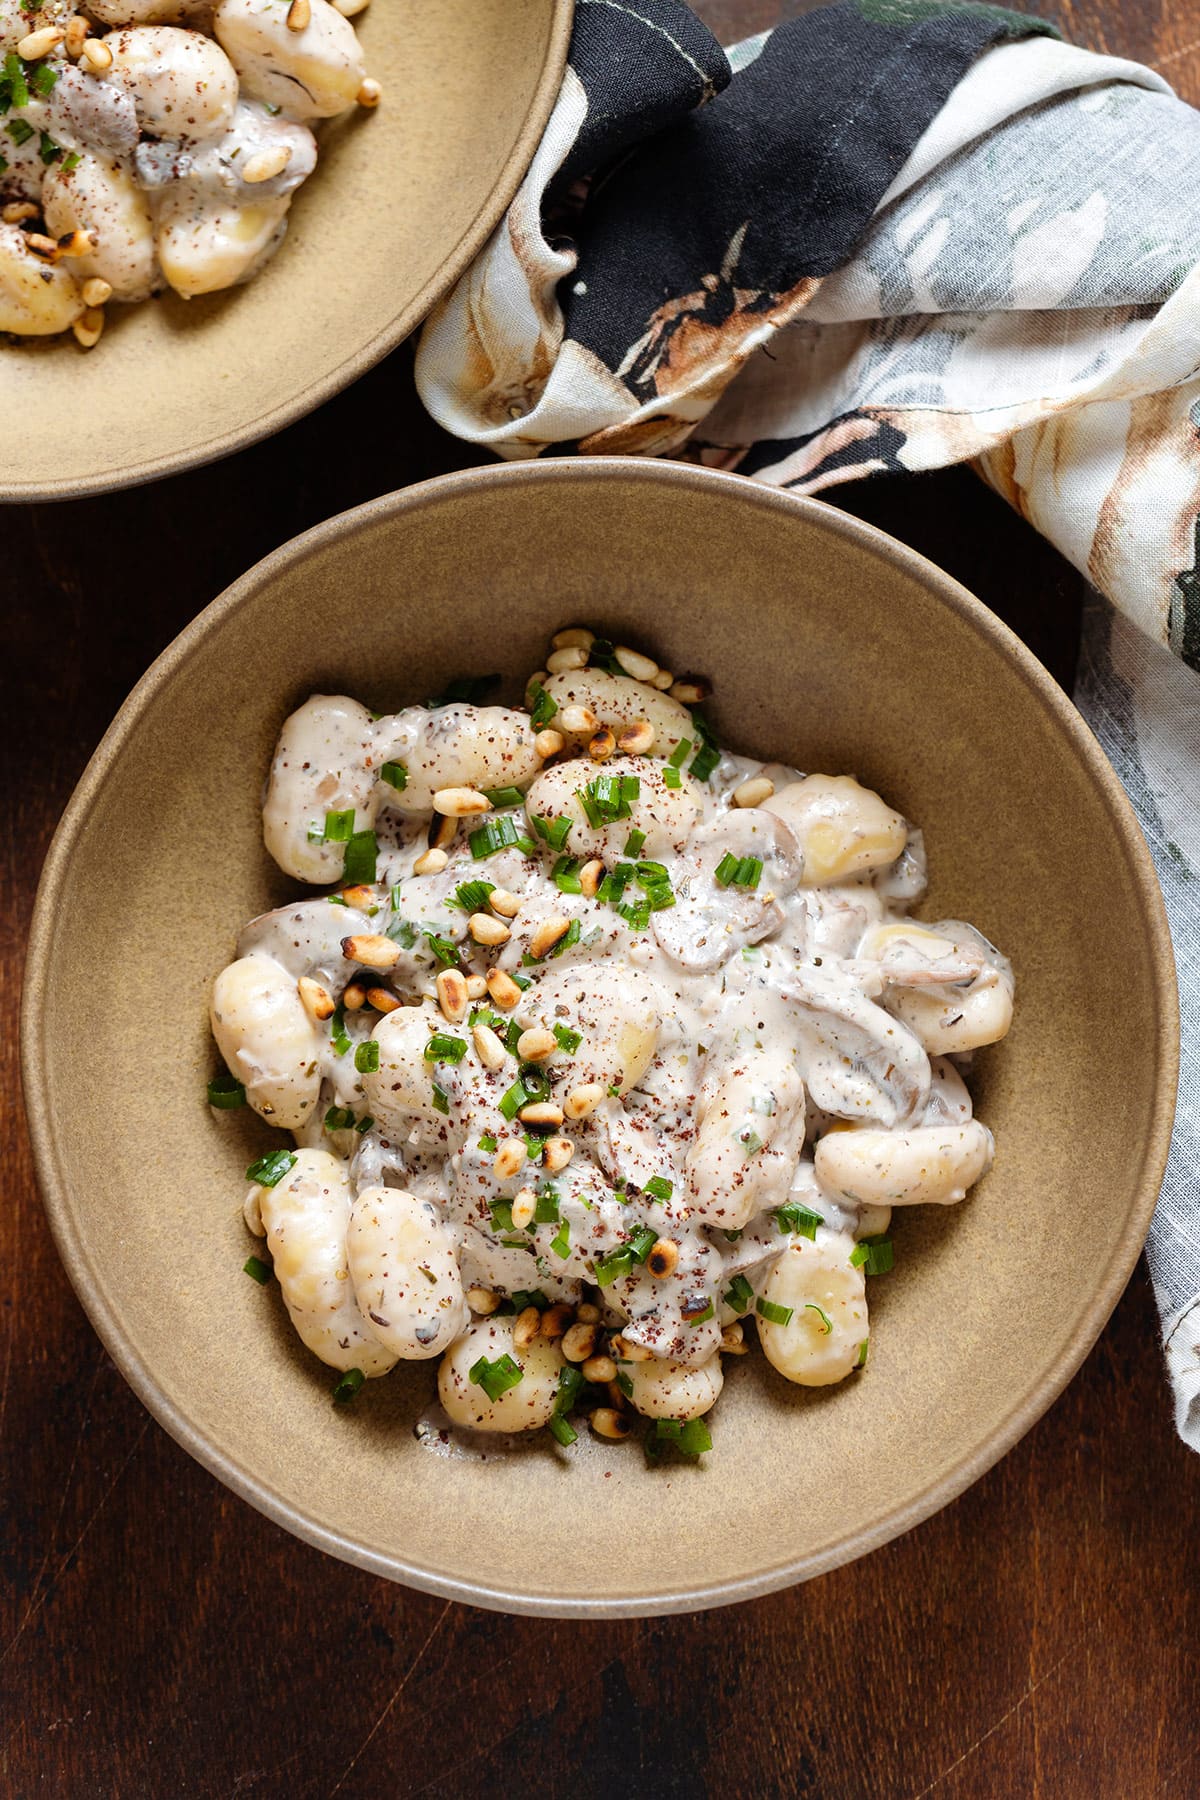 Creamy gnocchi with mushroom in a low brown bowl topped with toasted pine nuts, chives, and sumac.